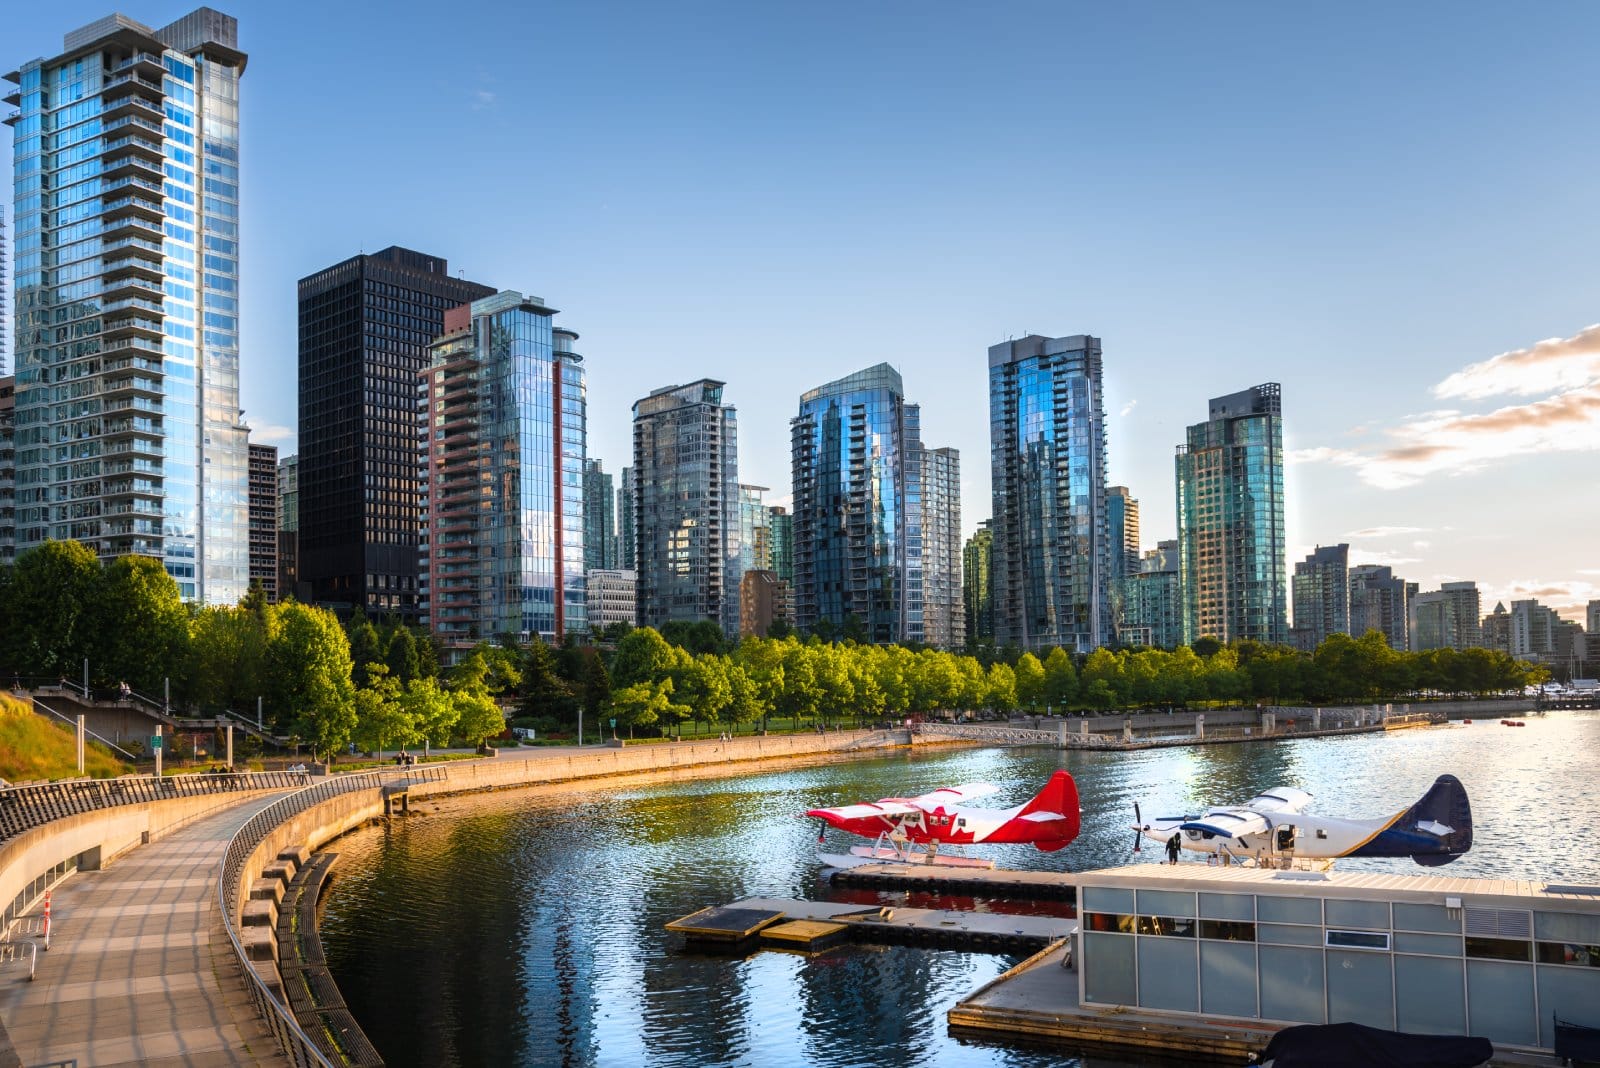 <p class="wp-caption-text">Image Credit: Shutterstock / Albert Pego</p>  <p><span>Vancouver’s dining scene is diverse, with numerous eateries offering stunning city views. Opt for a waterfront restaurant along Coal Harbour or False Creek, where you can enjoy fresh Pacific Northwest cuisine against the city skyline and bustling harbor backdrop.</span></p> <p><span>One of my favorites is LIFT for a quintessential Vancouver dining experience. It stands out with its breathtaking views of the harbor, Stanley Park, and the coastal mountains, boasting the city’s only oceanfront rooftop deck. It’s a sophisticated and stylish restaurant and lounge, nestled along the seawall in Coal Harbour, just minutes away from the financial district, major hotels, and the Vancouver Convention Centre. The restaurant showcases architectural brilliance, embodying the essence of West Coast hospitality. LIFT offers a fresh take on regionally sourced dishes and the riches of the Pacific Ocean. With features like floor-to-ceiling windows that disappear in the summer, a striking illuminated honey onyx bar, and cozy outdoor fireplaces, you are invited to immerse themselves in an atmosphere of relaxed elegance.</span></p>